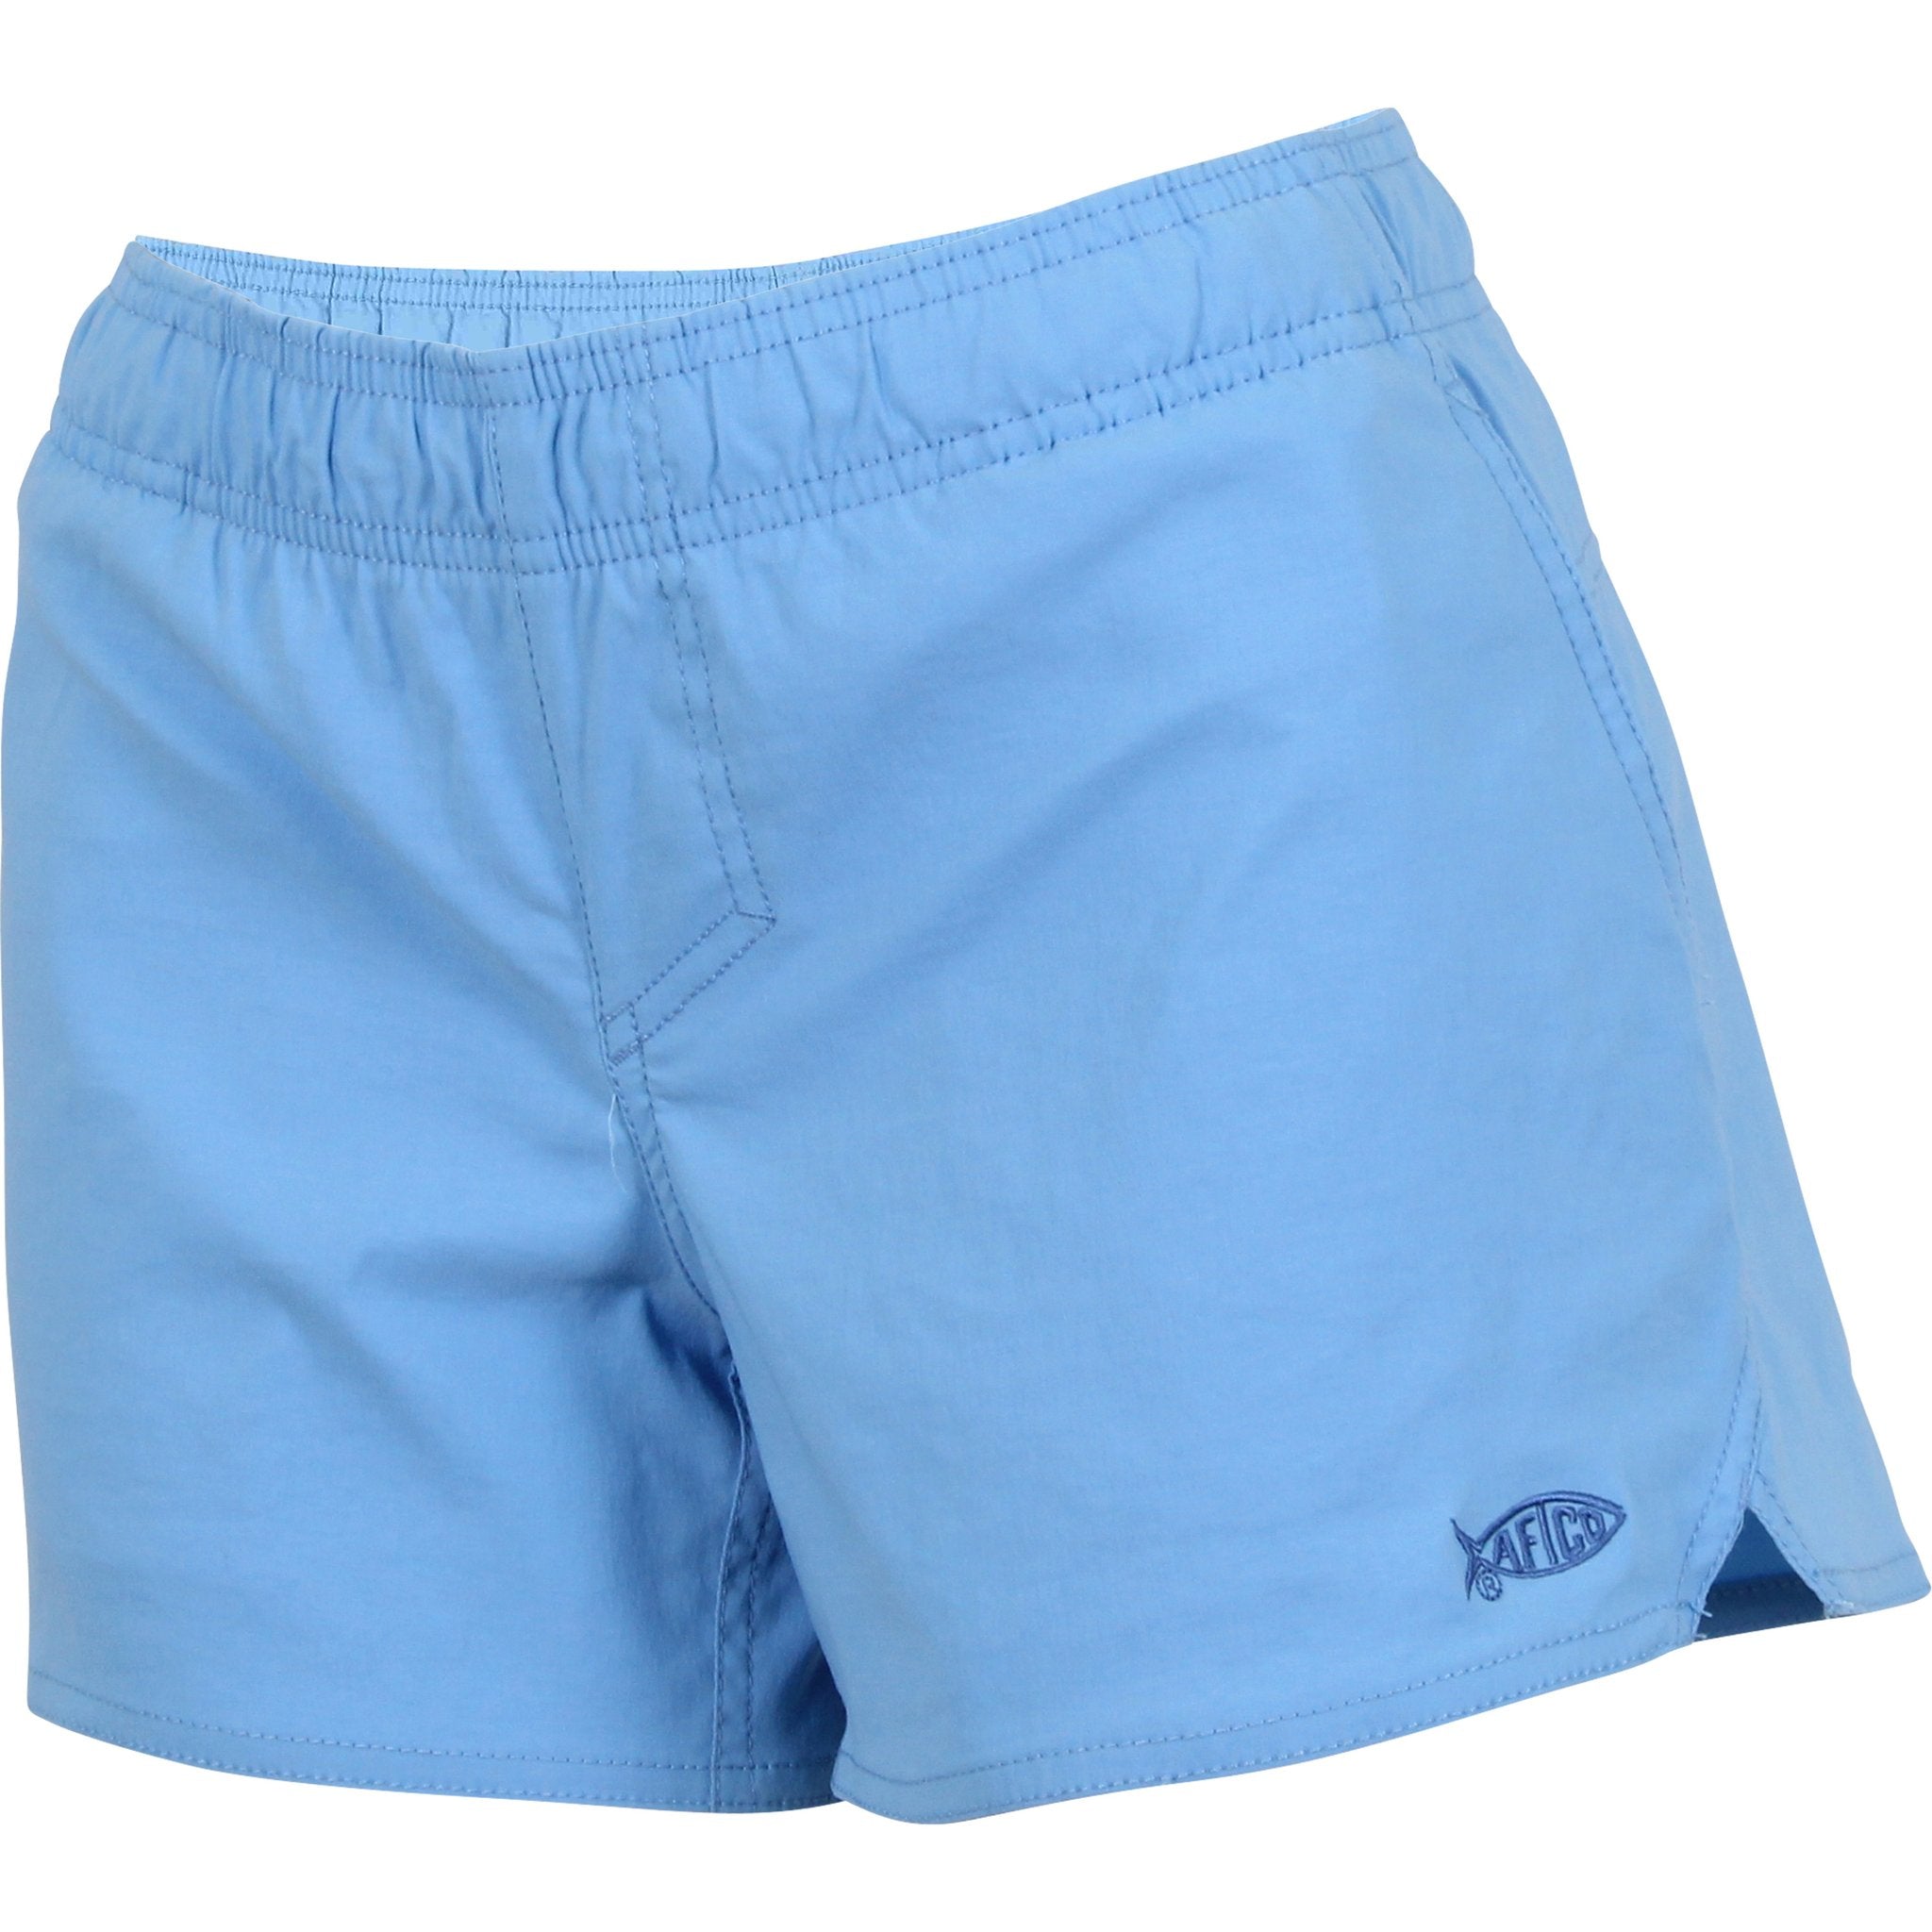 AFTCO Womens Sirena Shorts - Azure from AFTCO - CHAOS Fishing